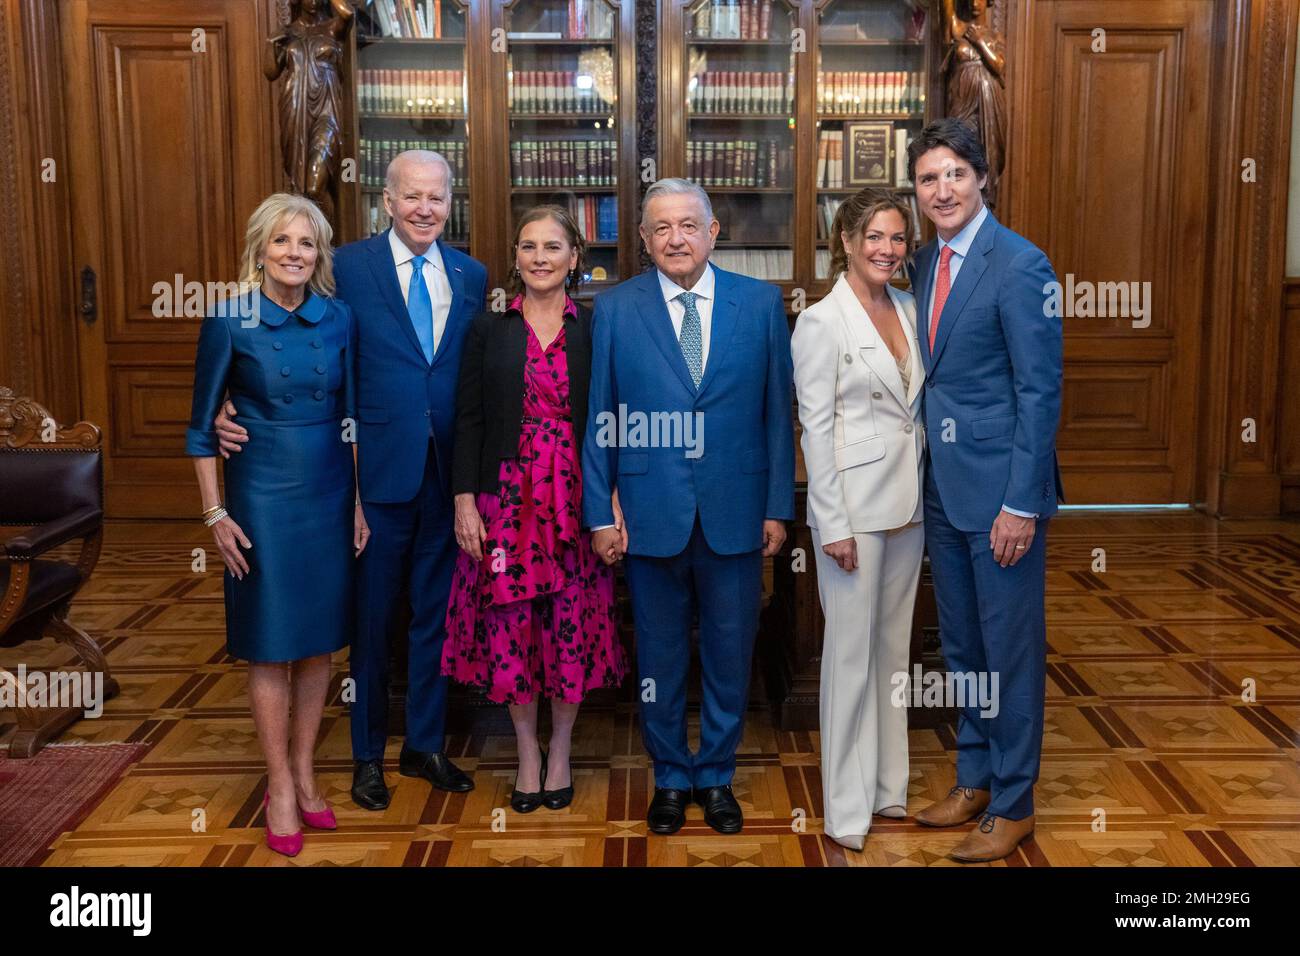 President Joe Biden and First Lady Jill Biden pose for photos with Mexican President Andres Manuel Lopez Obrador, his wife Dr. Beatriz Gutiérrez Müller, Canadian Prime Minister Justin Trudeau and his wife Sophie Gregoire Trudeau, Tuesday, January 10, 2023, in the President’s Office at the National Palace in Mexico City. (Official White House Photo by Adam Schultz) Stock Photo